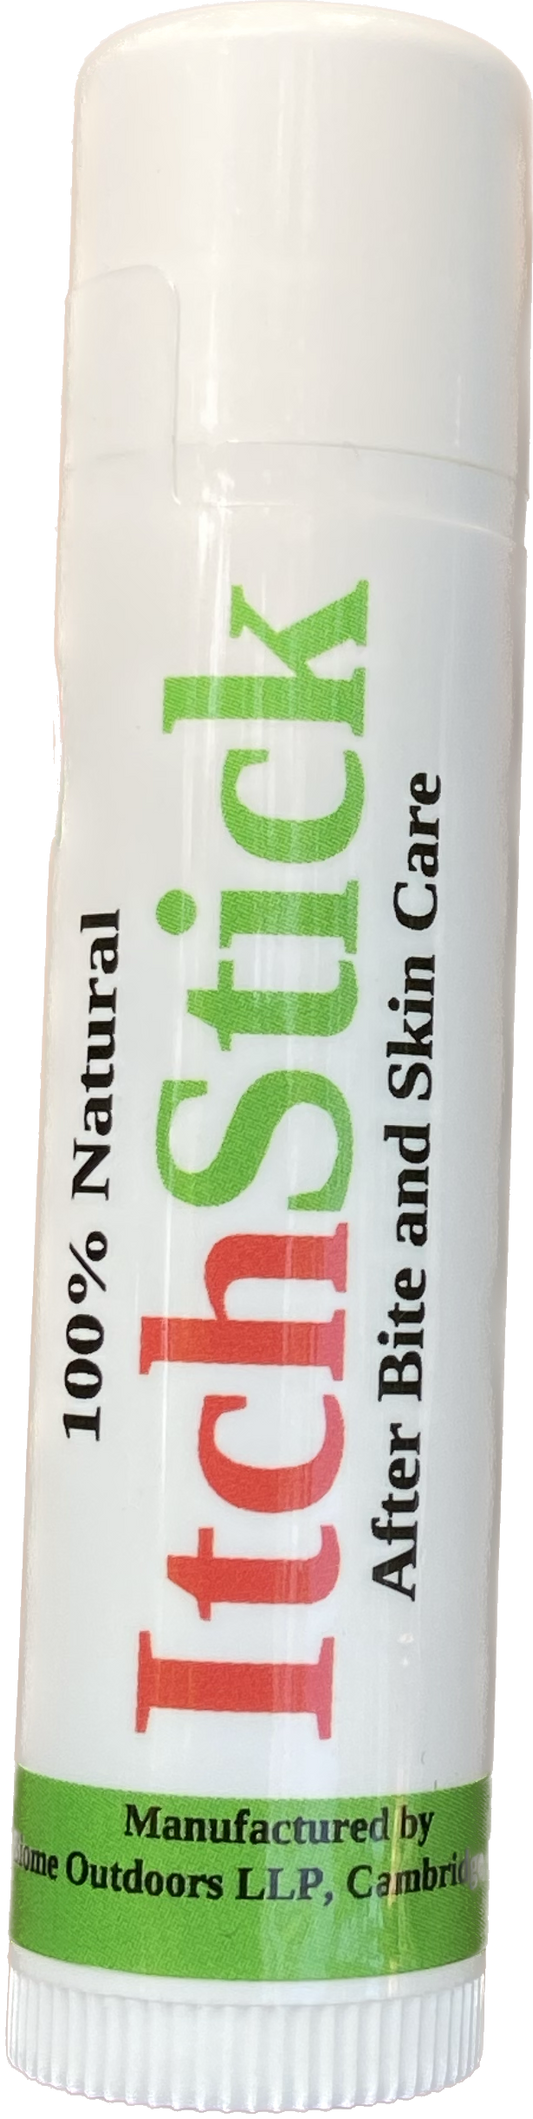 100% Natural ItchStick After Bite and Skin Care Instant Mosquito and Bug Bite Relief Stick